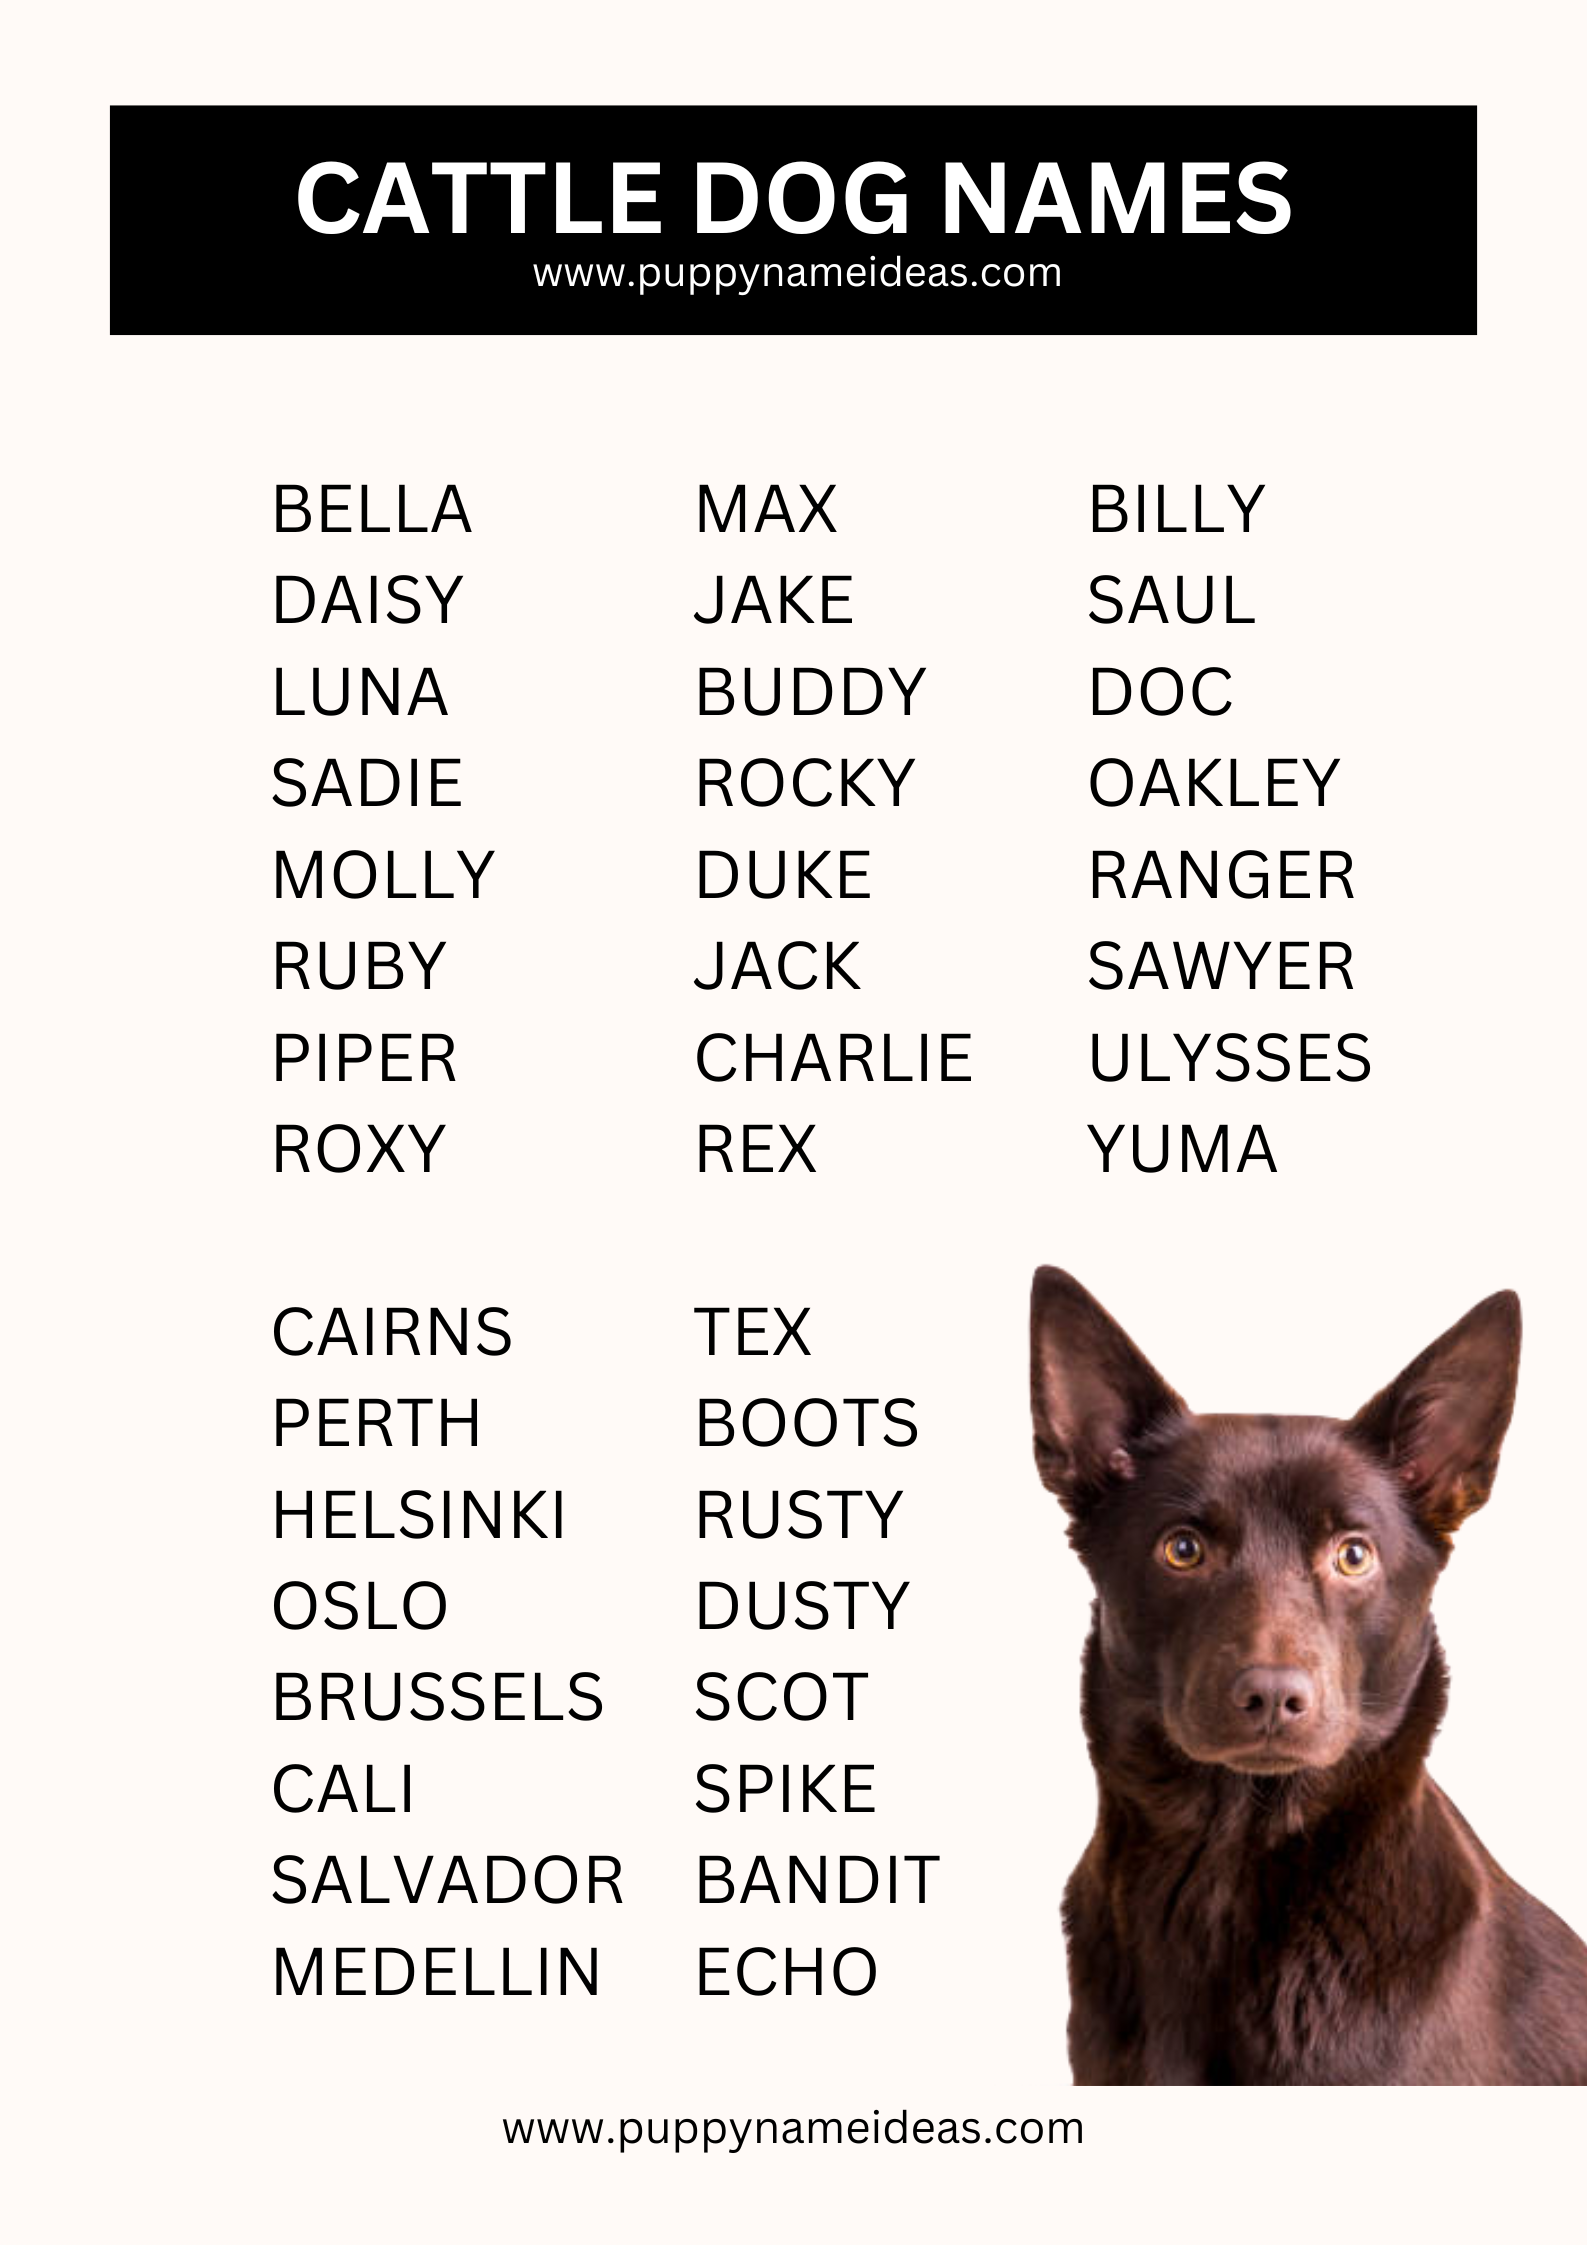 list of cattle dog names